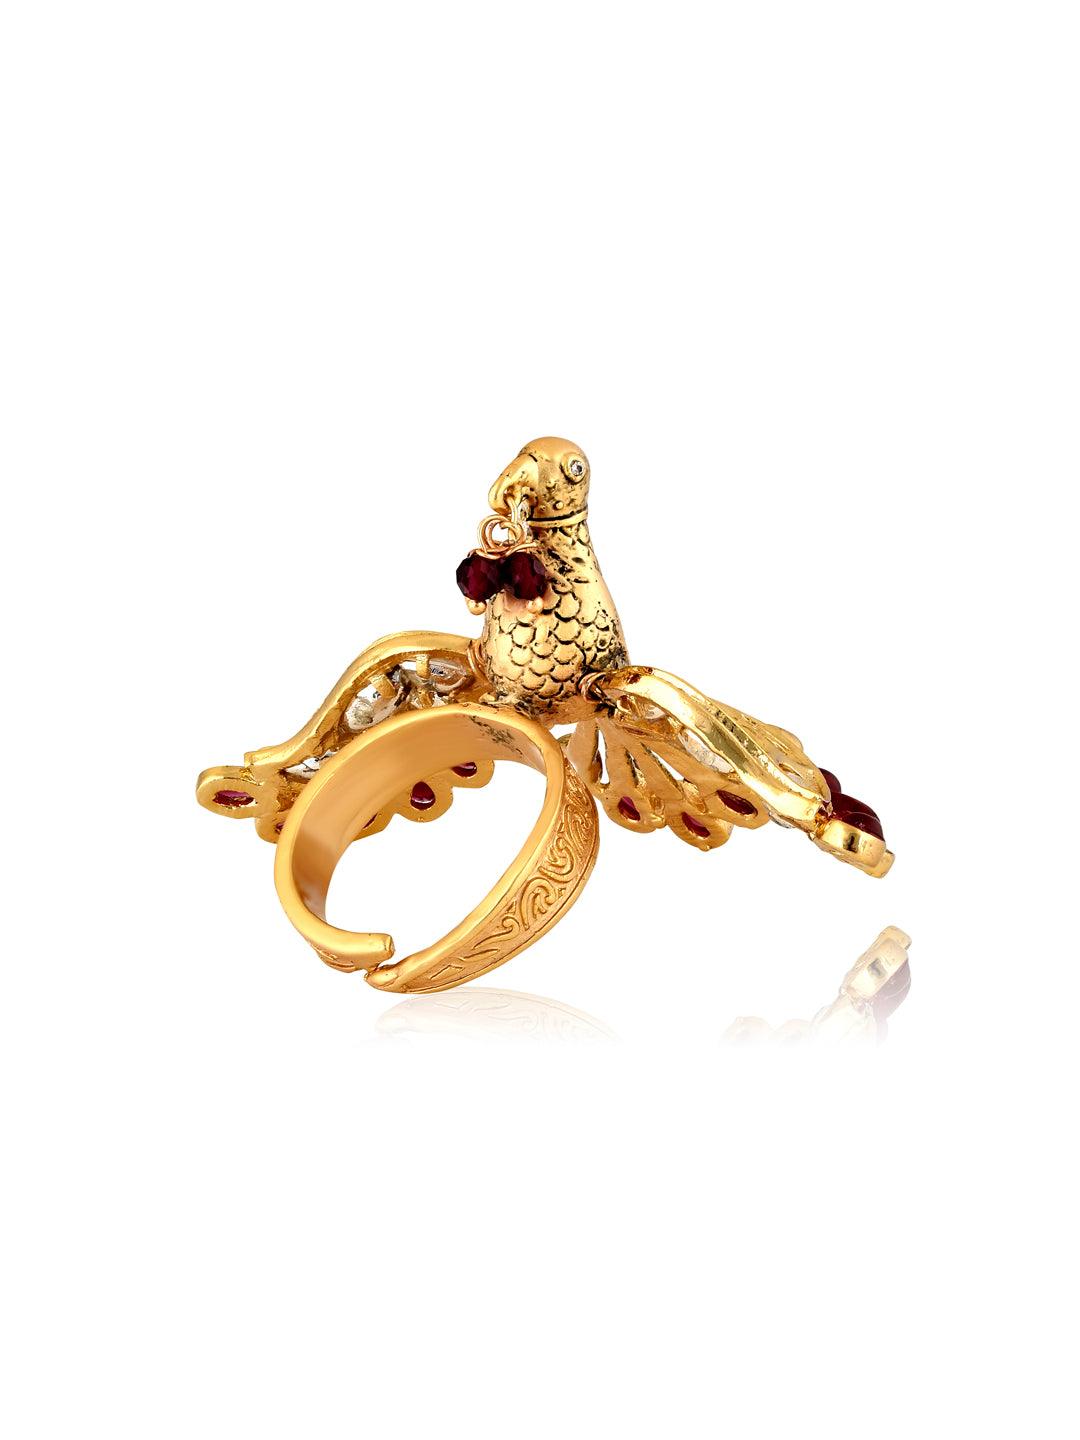 Spread Your Wings Bridal Ring - Curio Cottage 